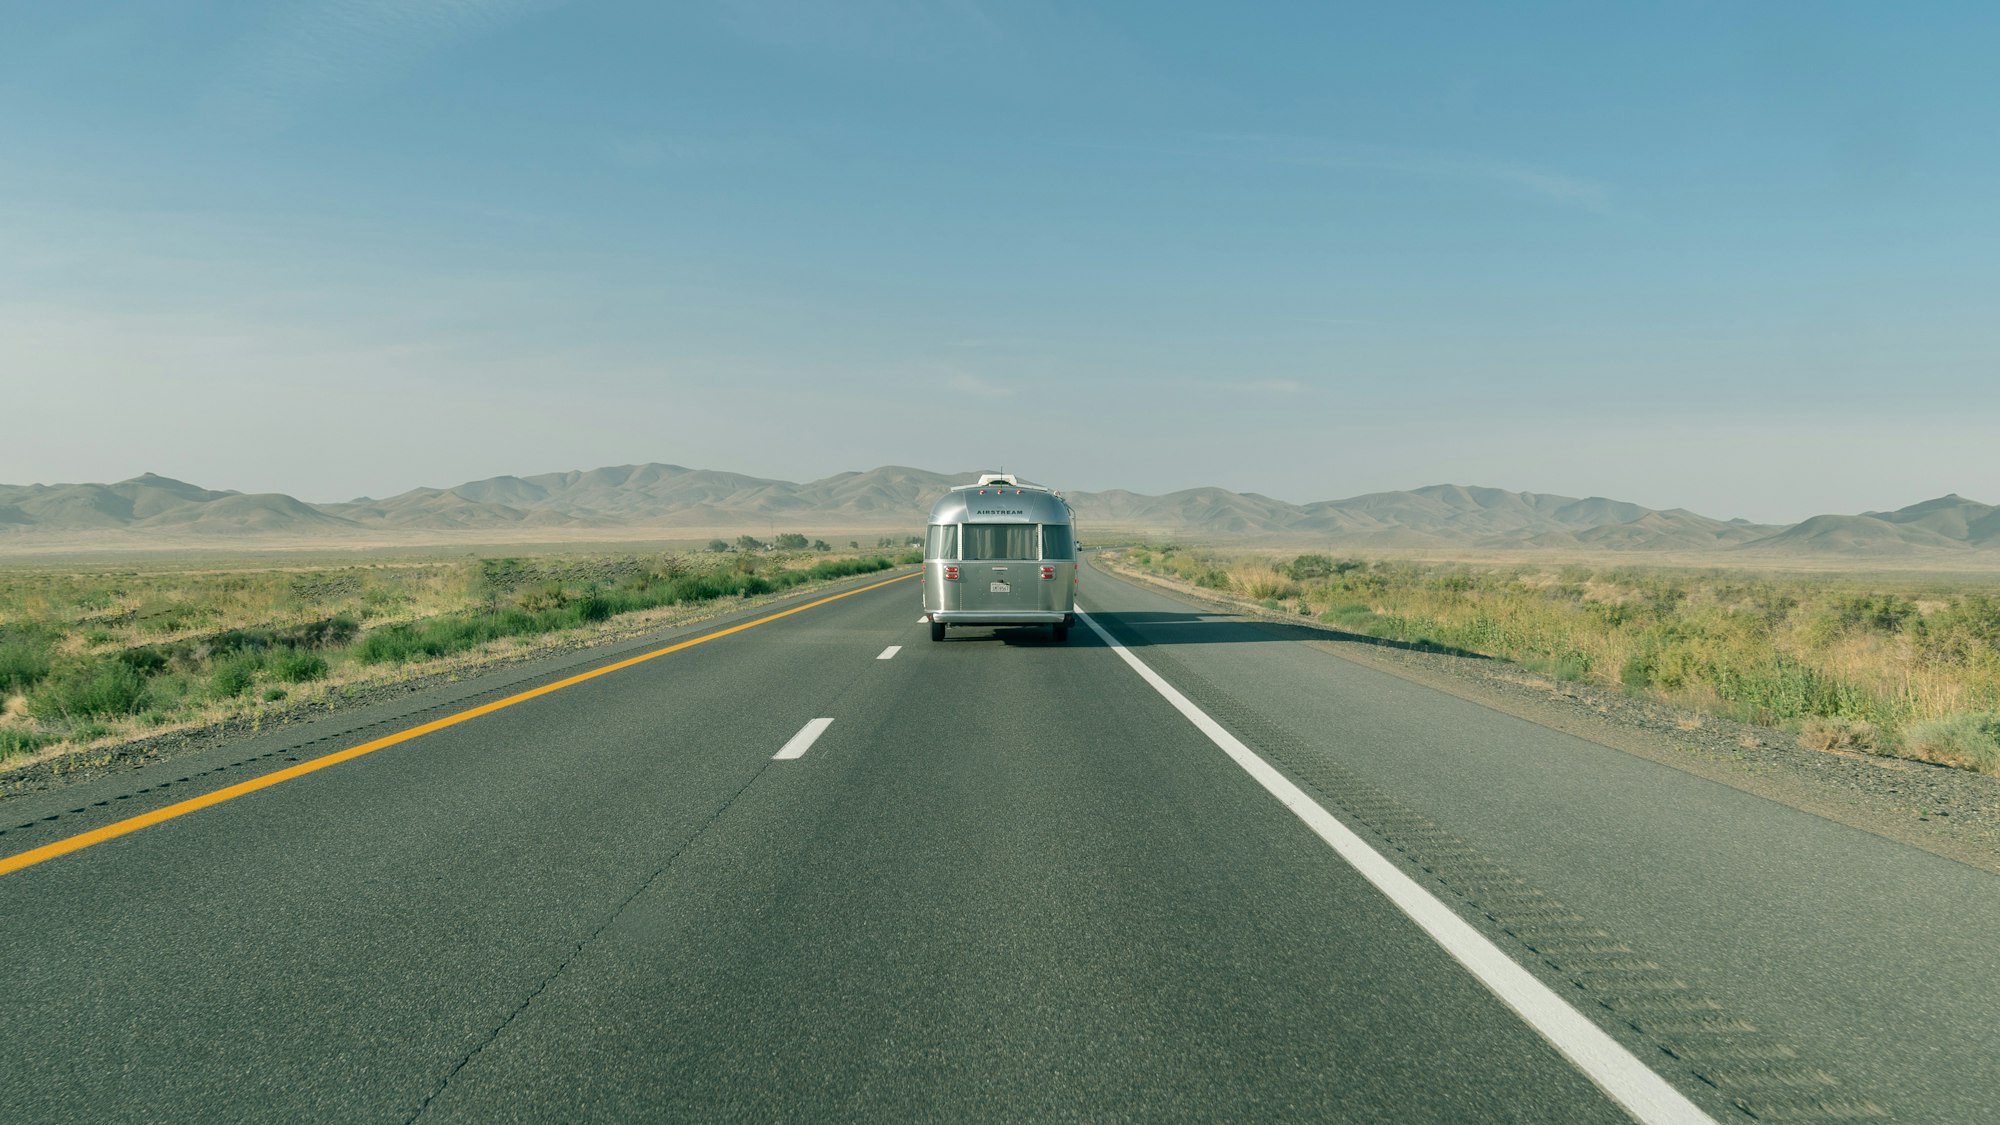 Airstream on the road